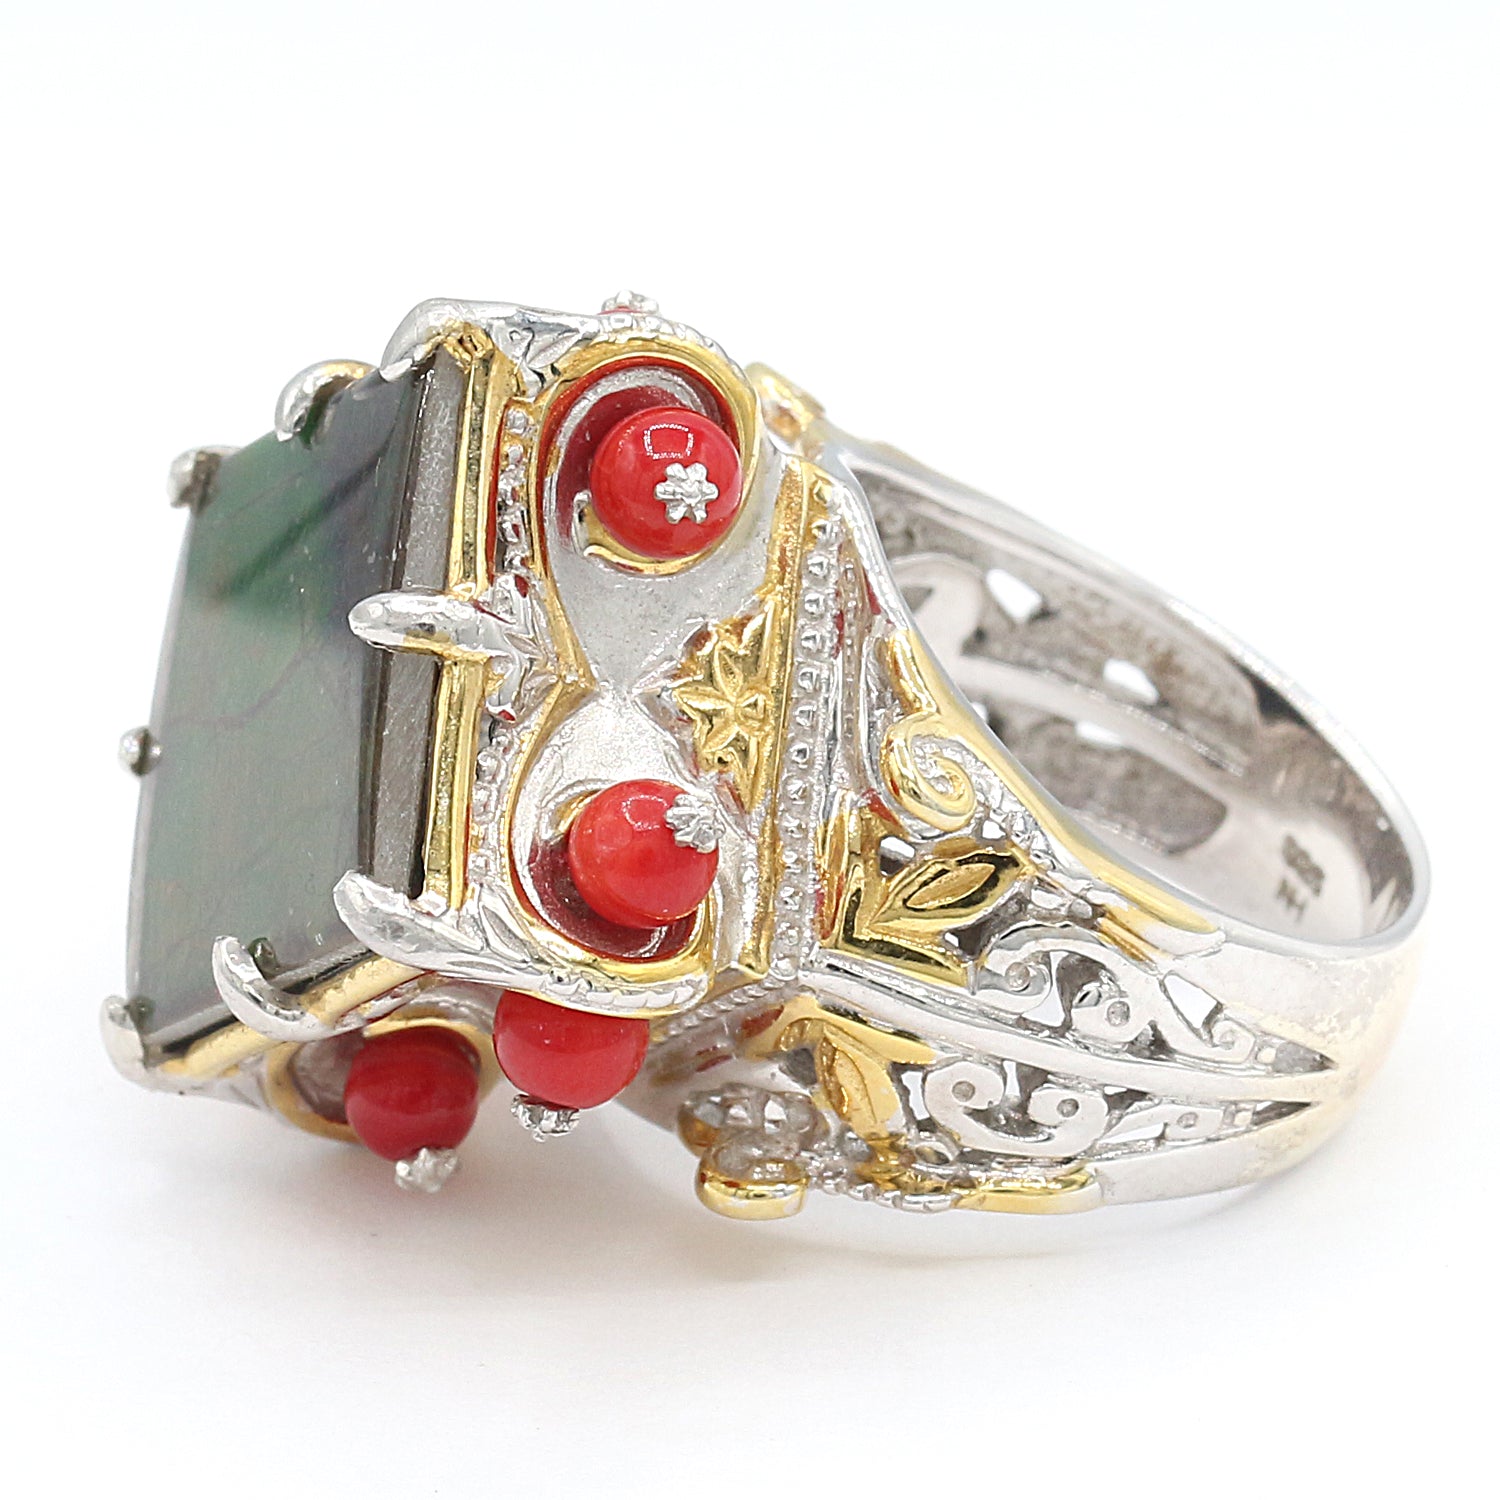 Gems en Vogue Ammolite & Red Coral Bead Italy Collection Ring